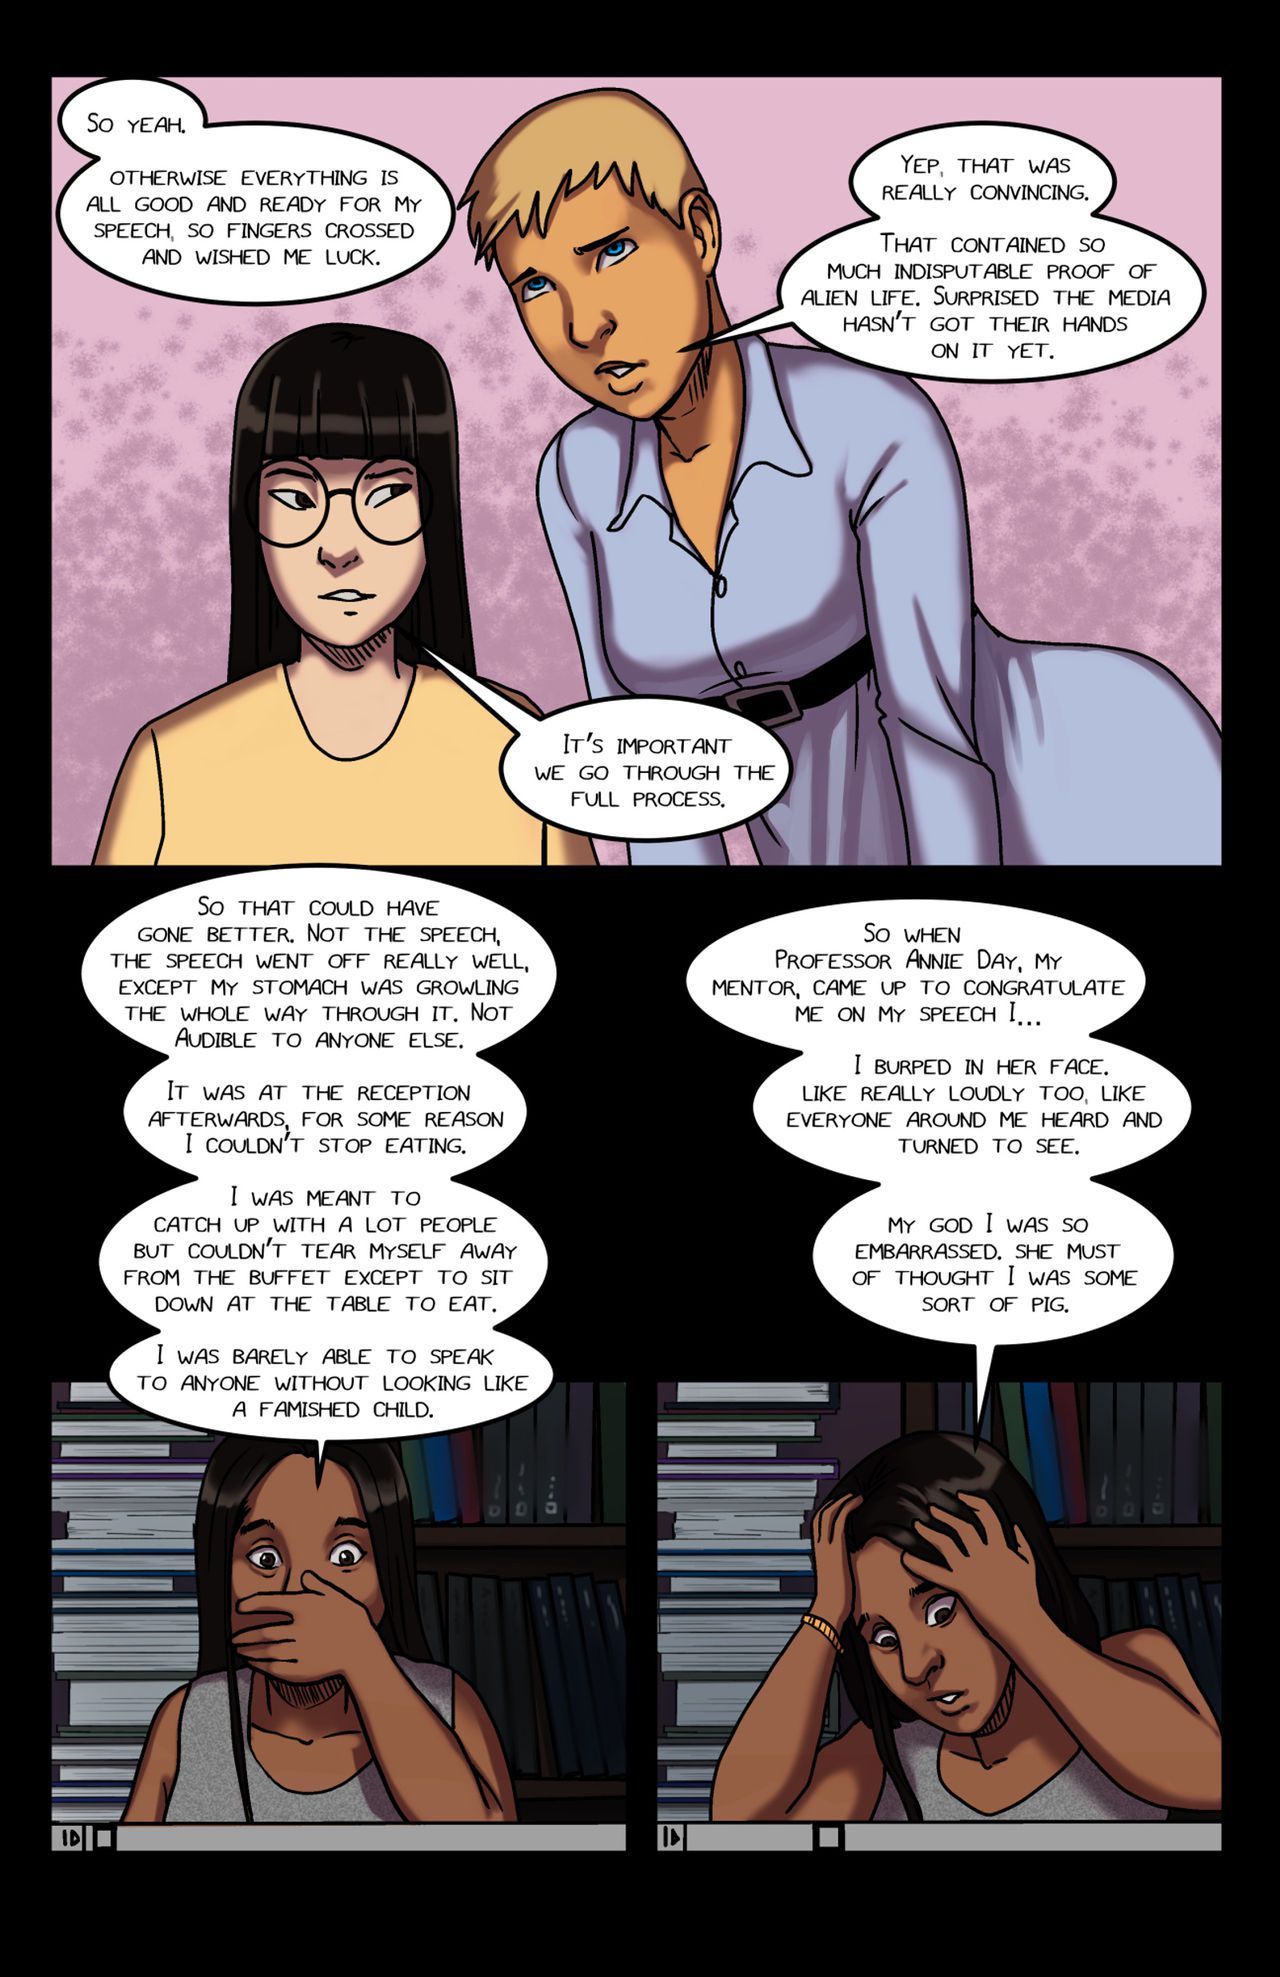 [Olympic-Dames] Alien Pregnancy Expansion Comic Updated (Ongoing) 41